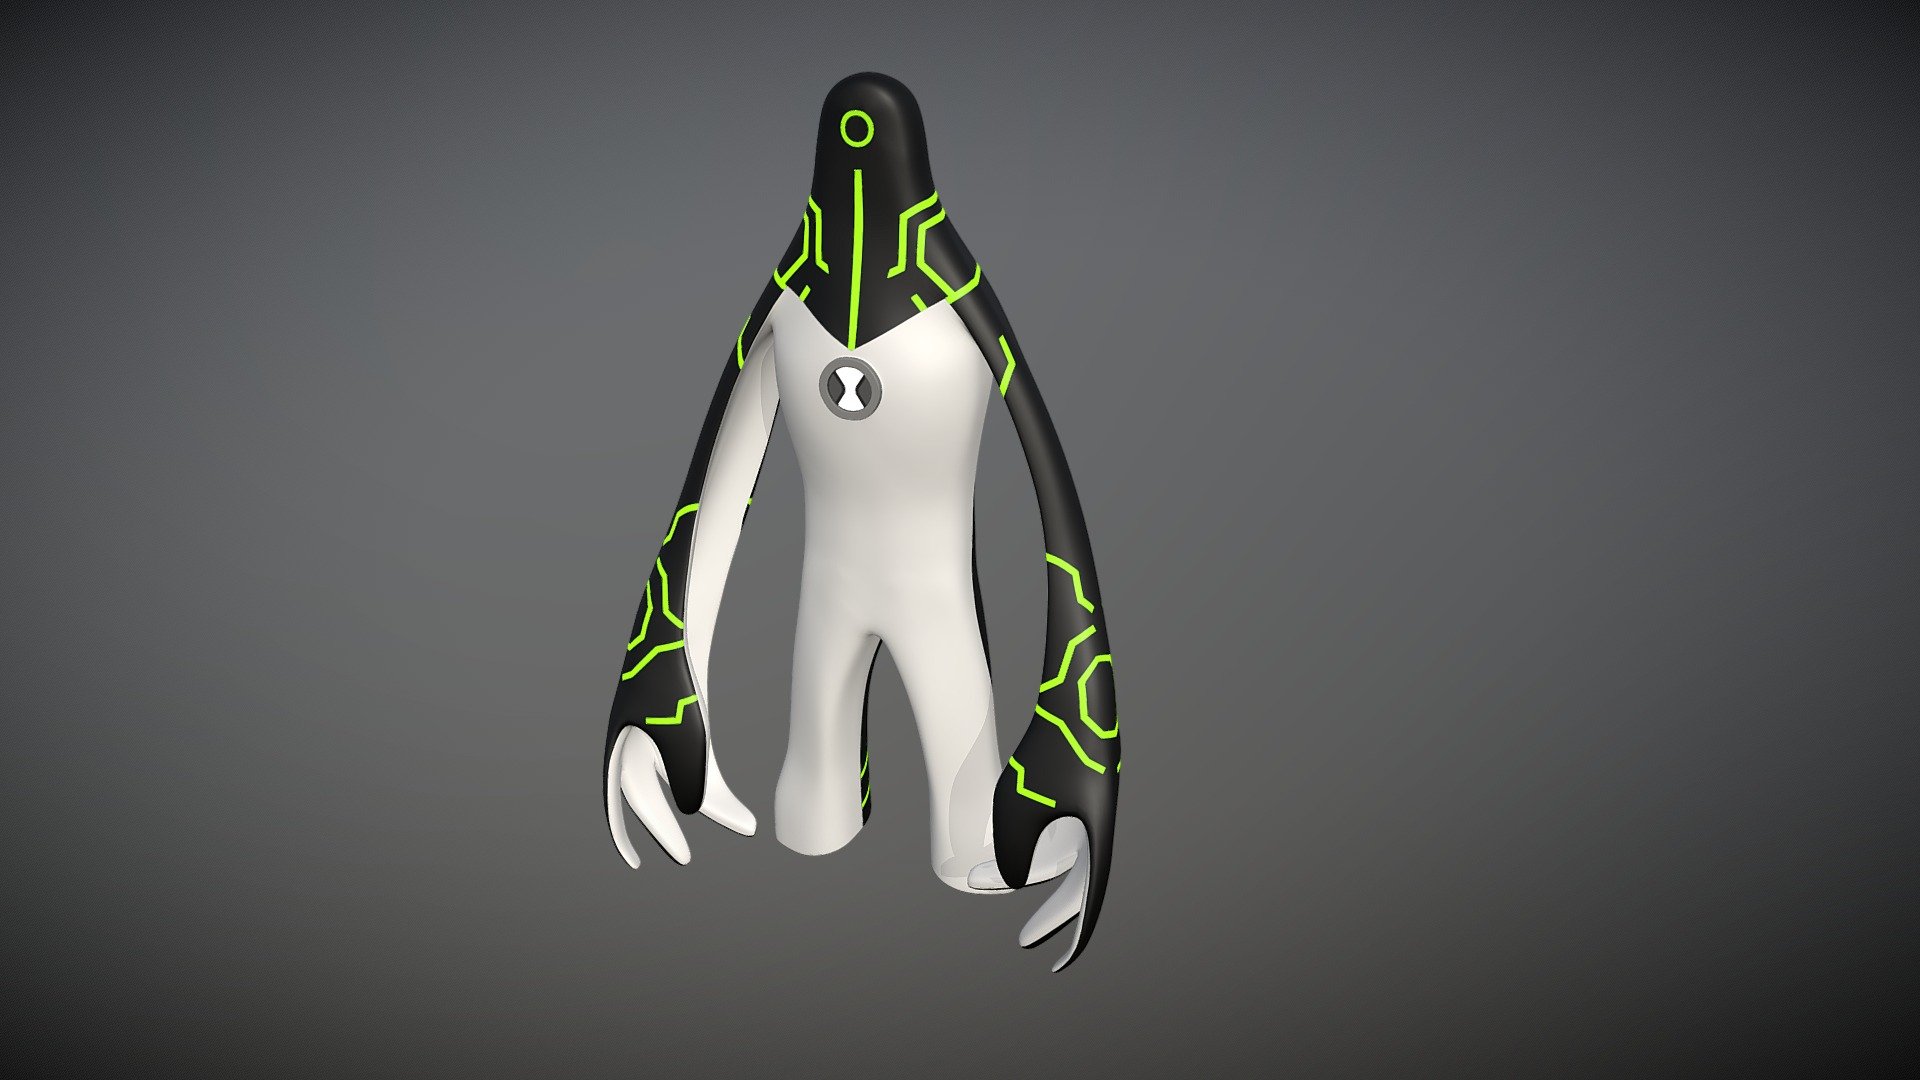 Ben 10 character, organic modeling in 3Dmax and texturing in Substance Painter - Ultra-T - 3D model by Oscart_3D 3d model